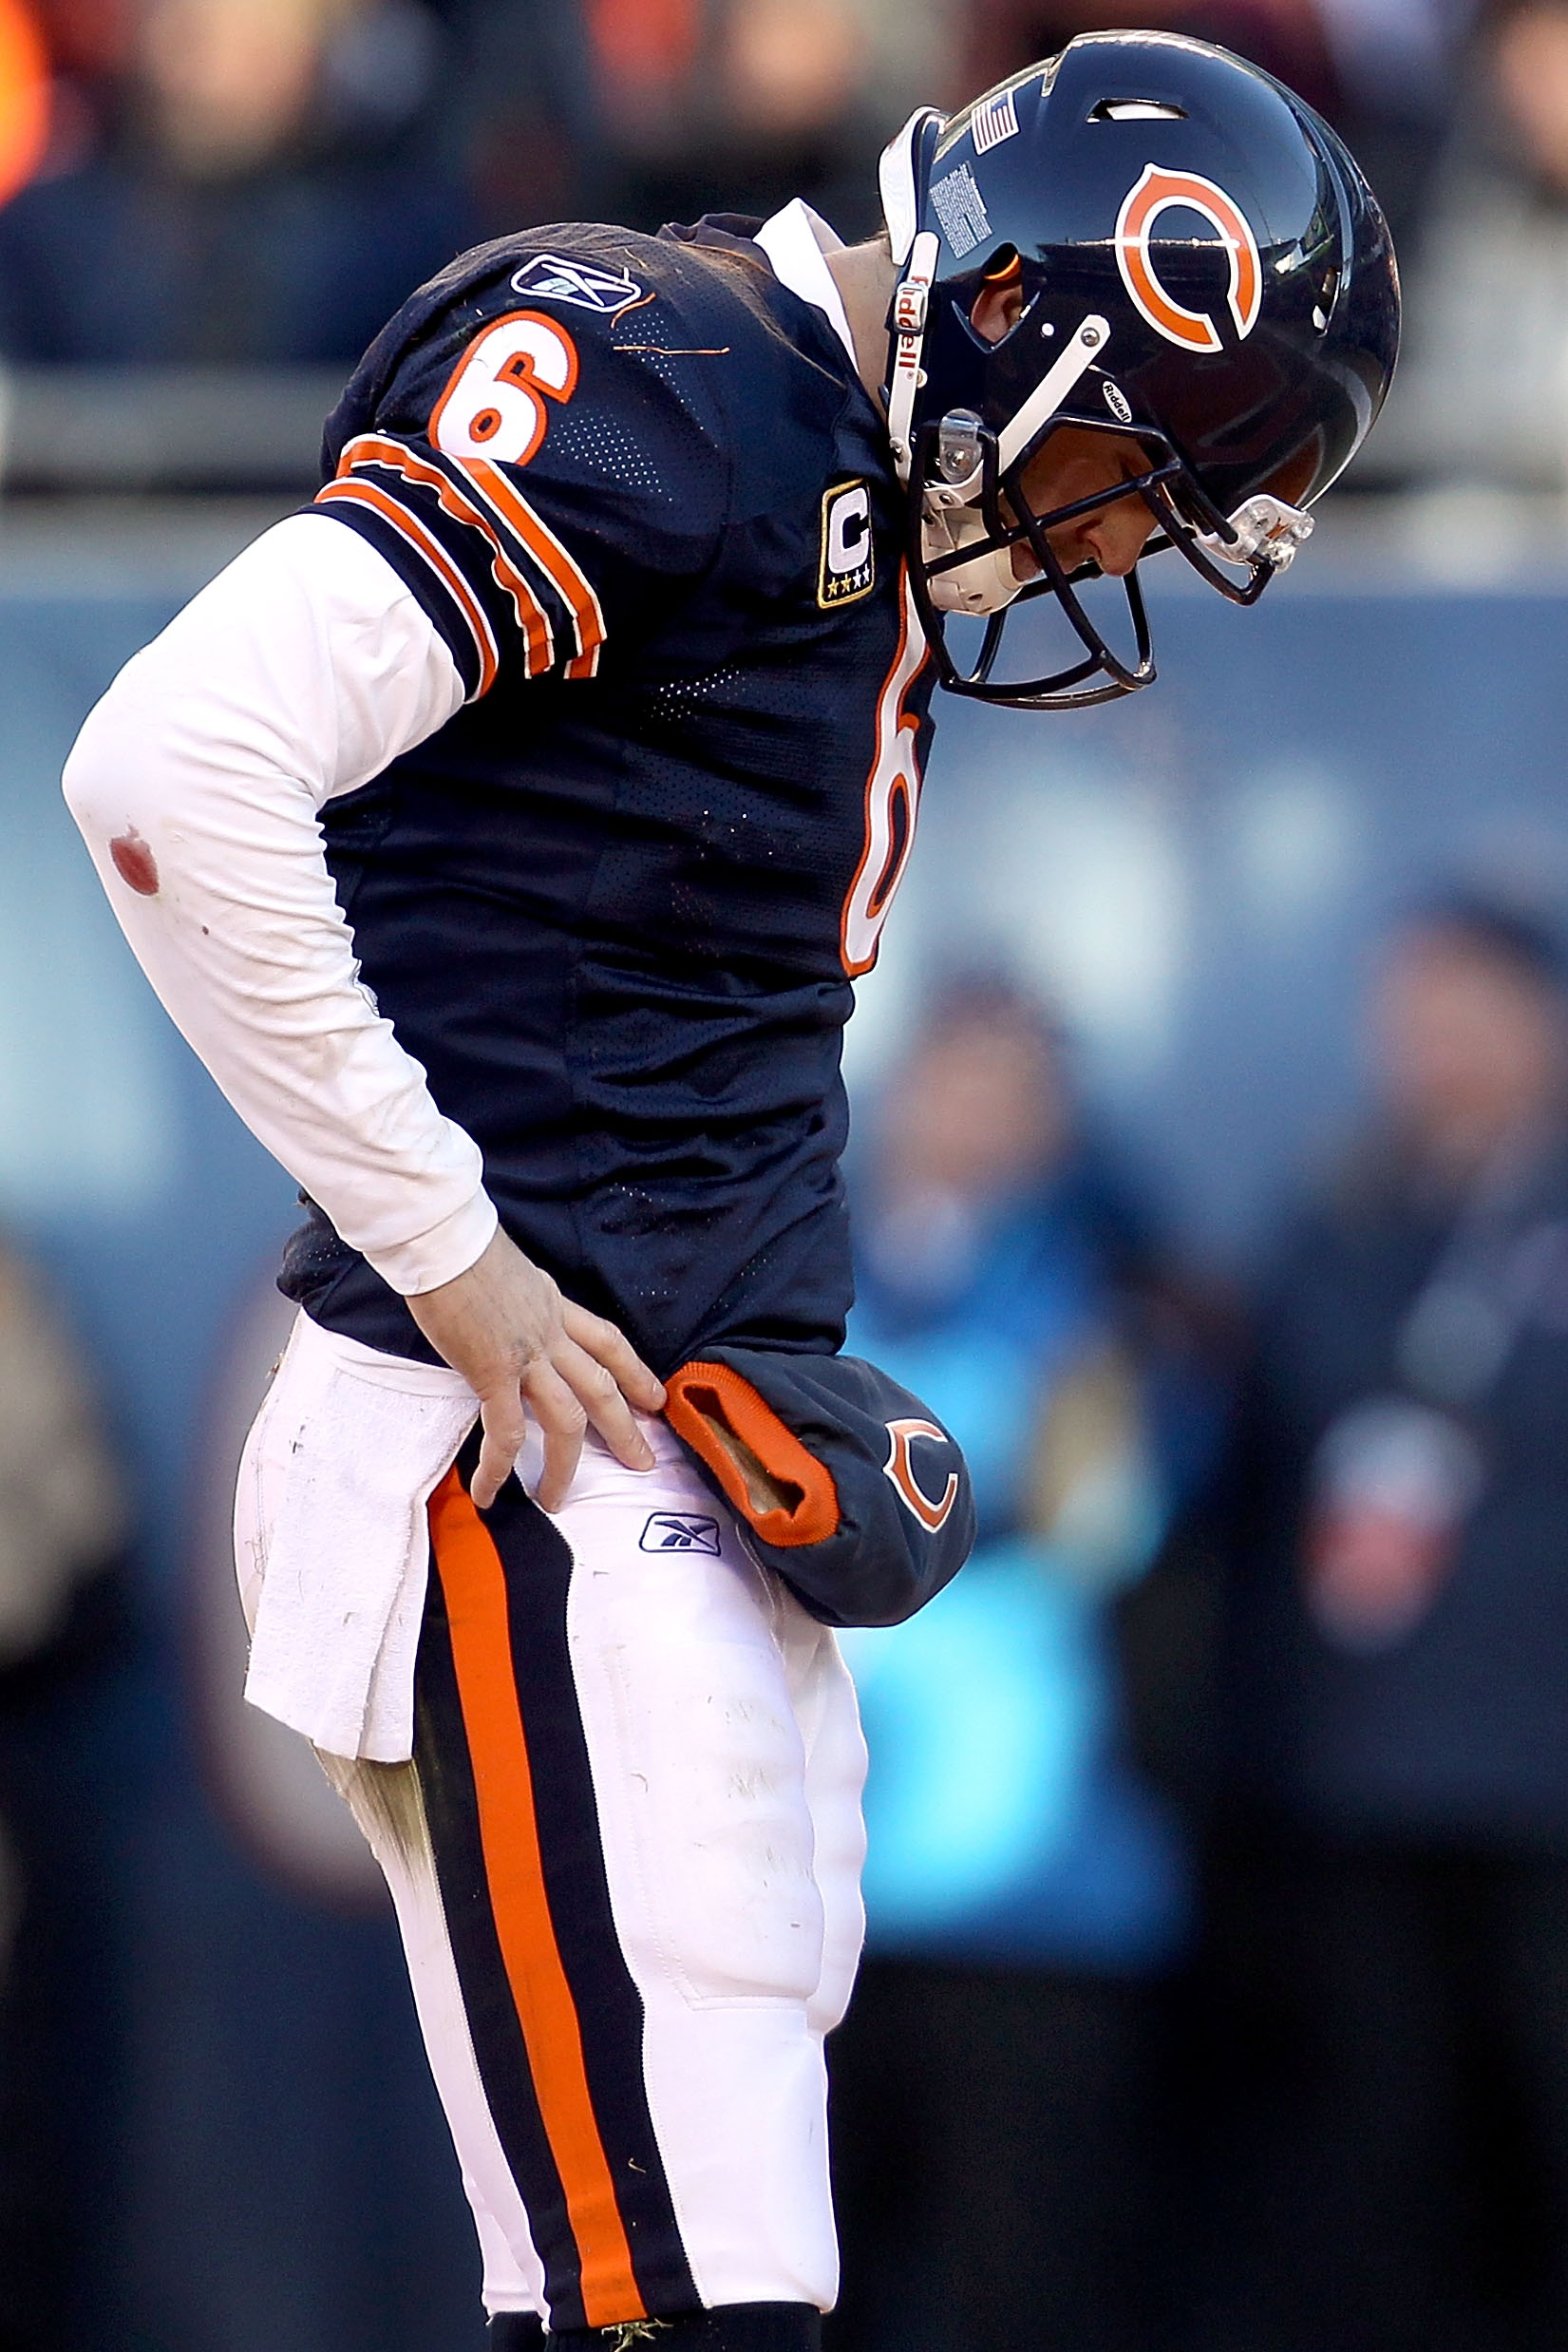 Did Cutler have a leg to stand on?